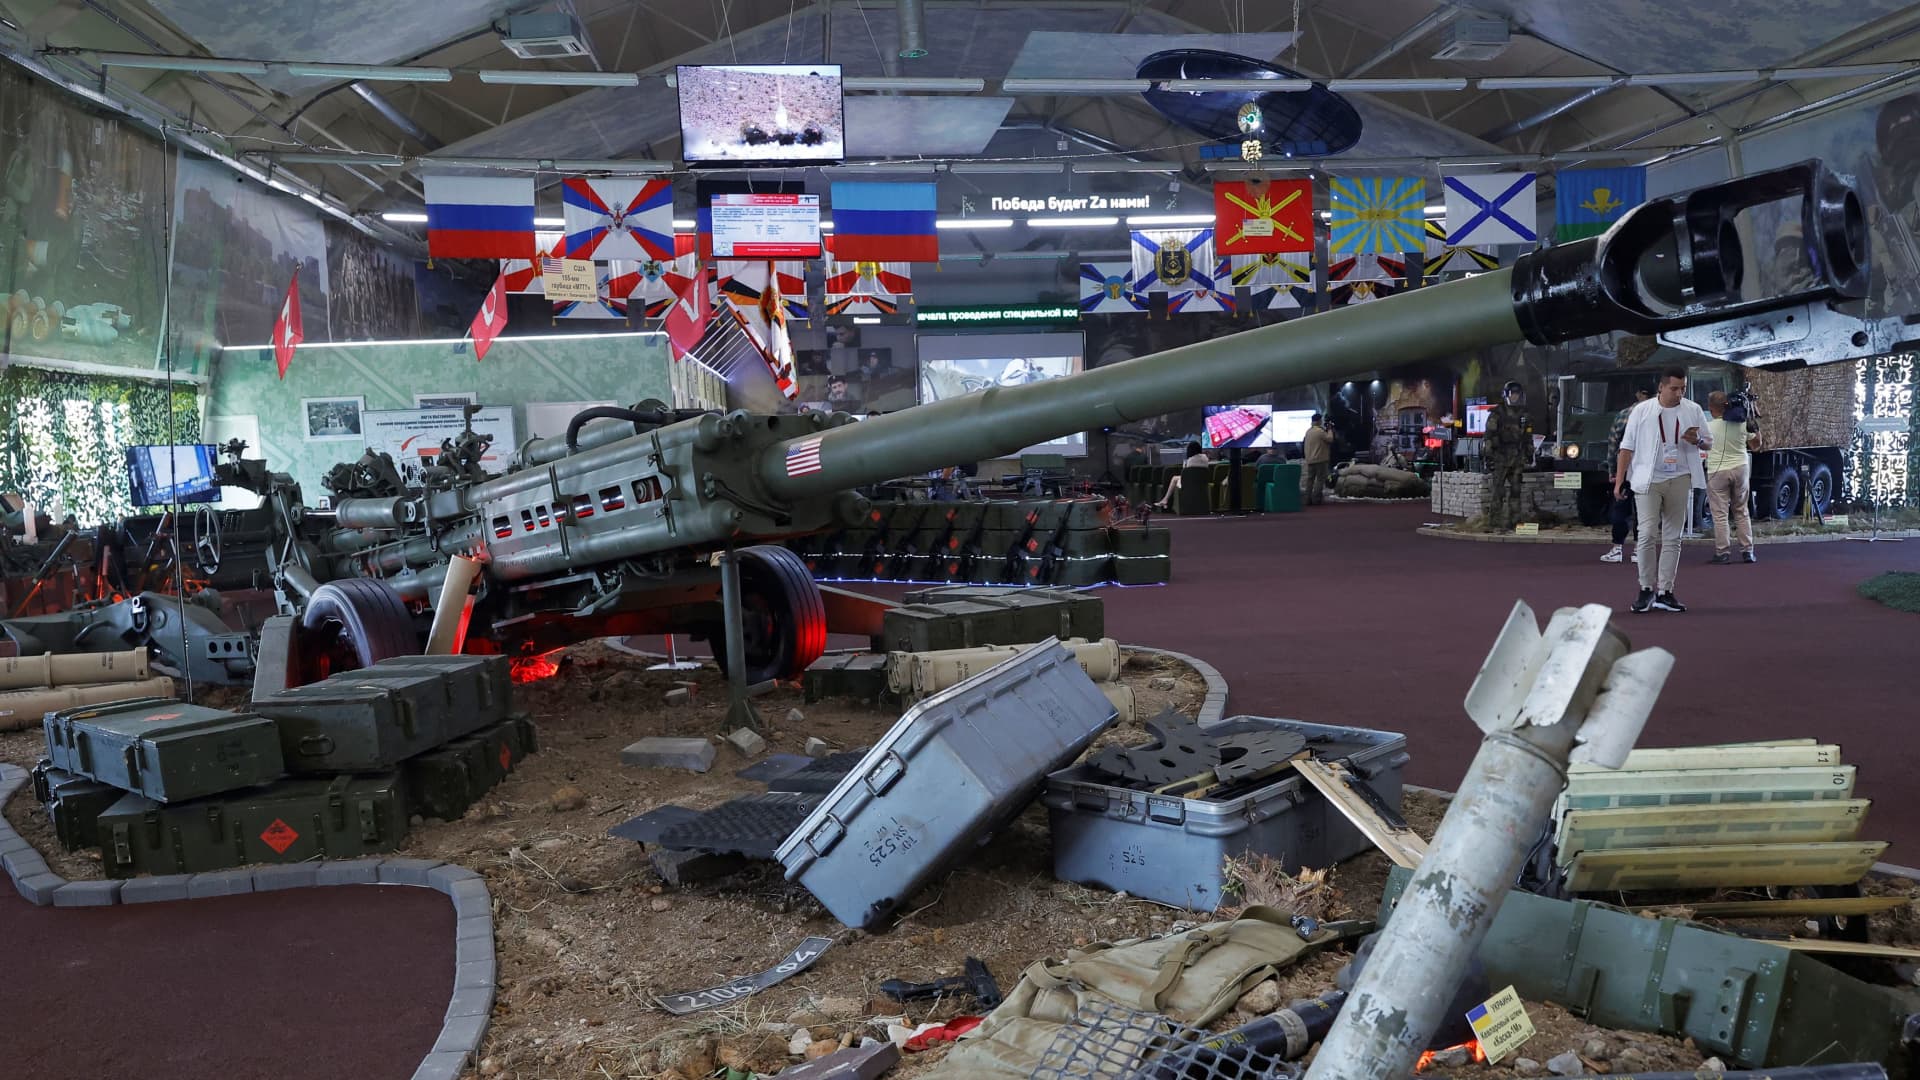 An M777 howitzer is on display during the exhibition of weaponry and equipment that, according to the Russian defence ministry, were captured during the military conflict in Ukraine, at the international military-technical forum Army-2022 at Patriot Congress and Exhibition Centre in the Moscow region, Russia August 17, 2022. 